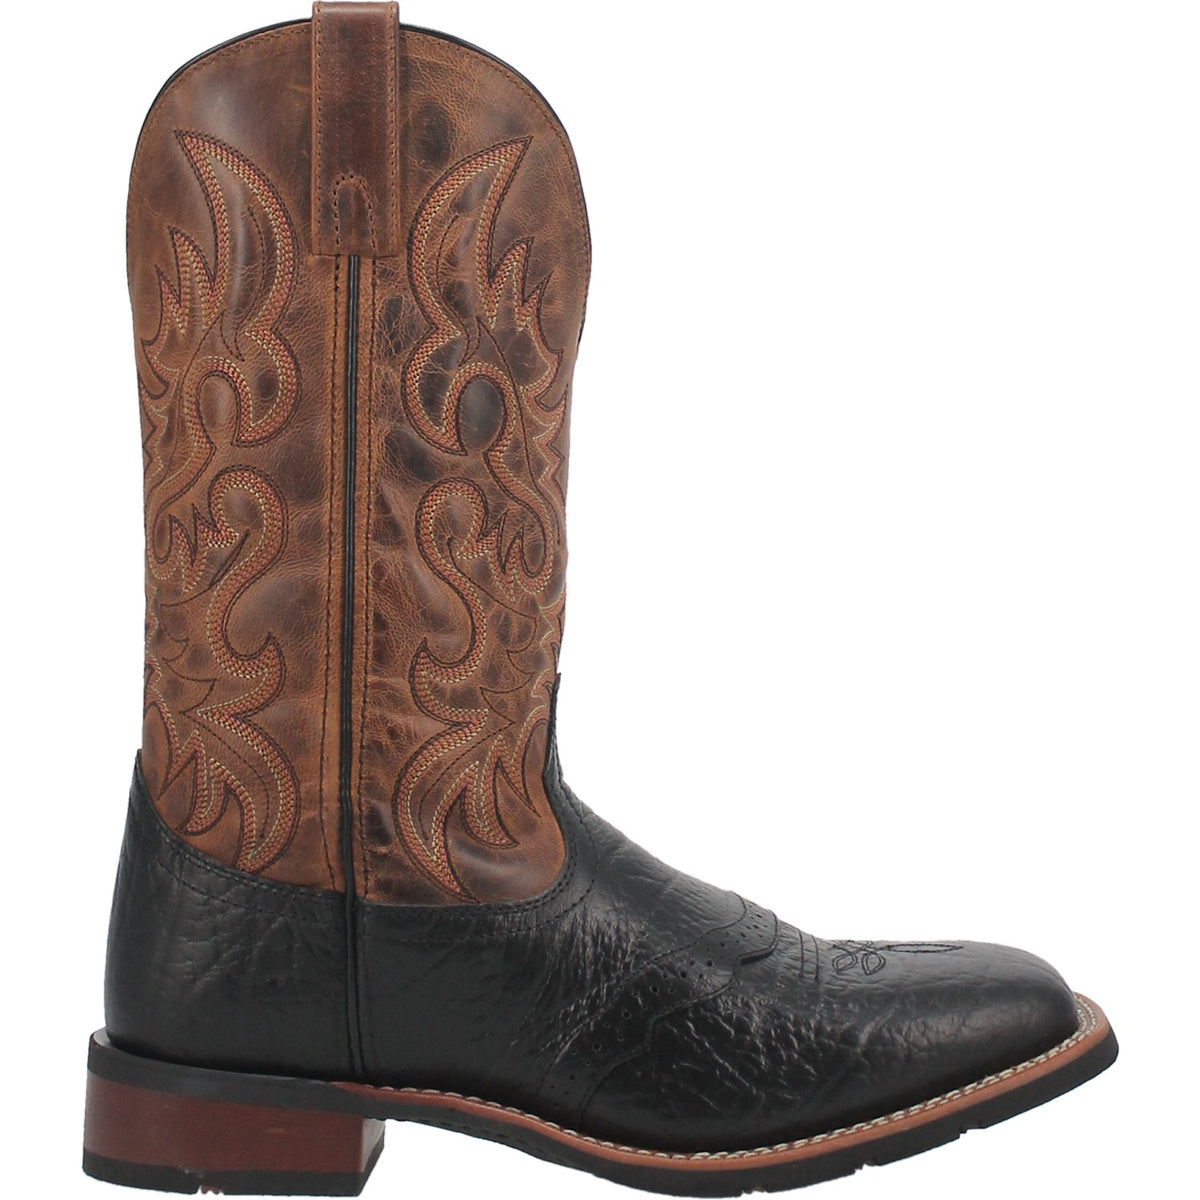 TOPEKA LEATHER BOOT Cover